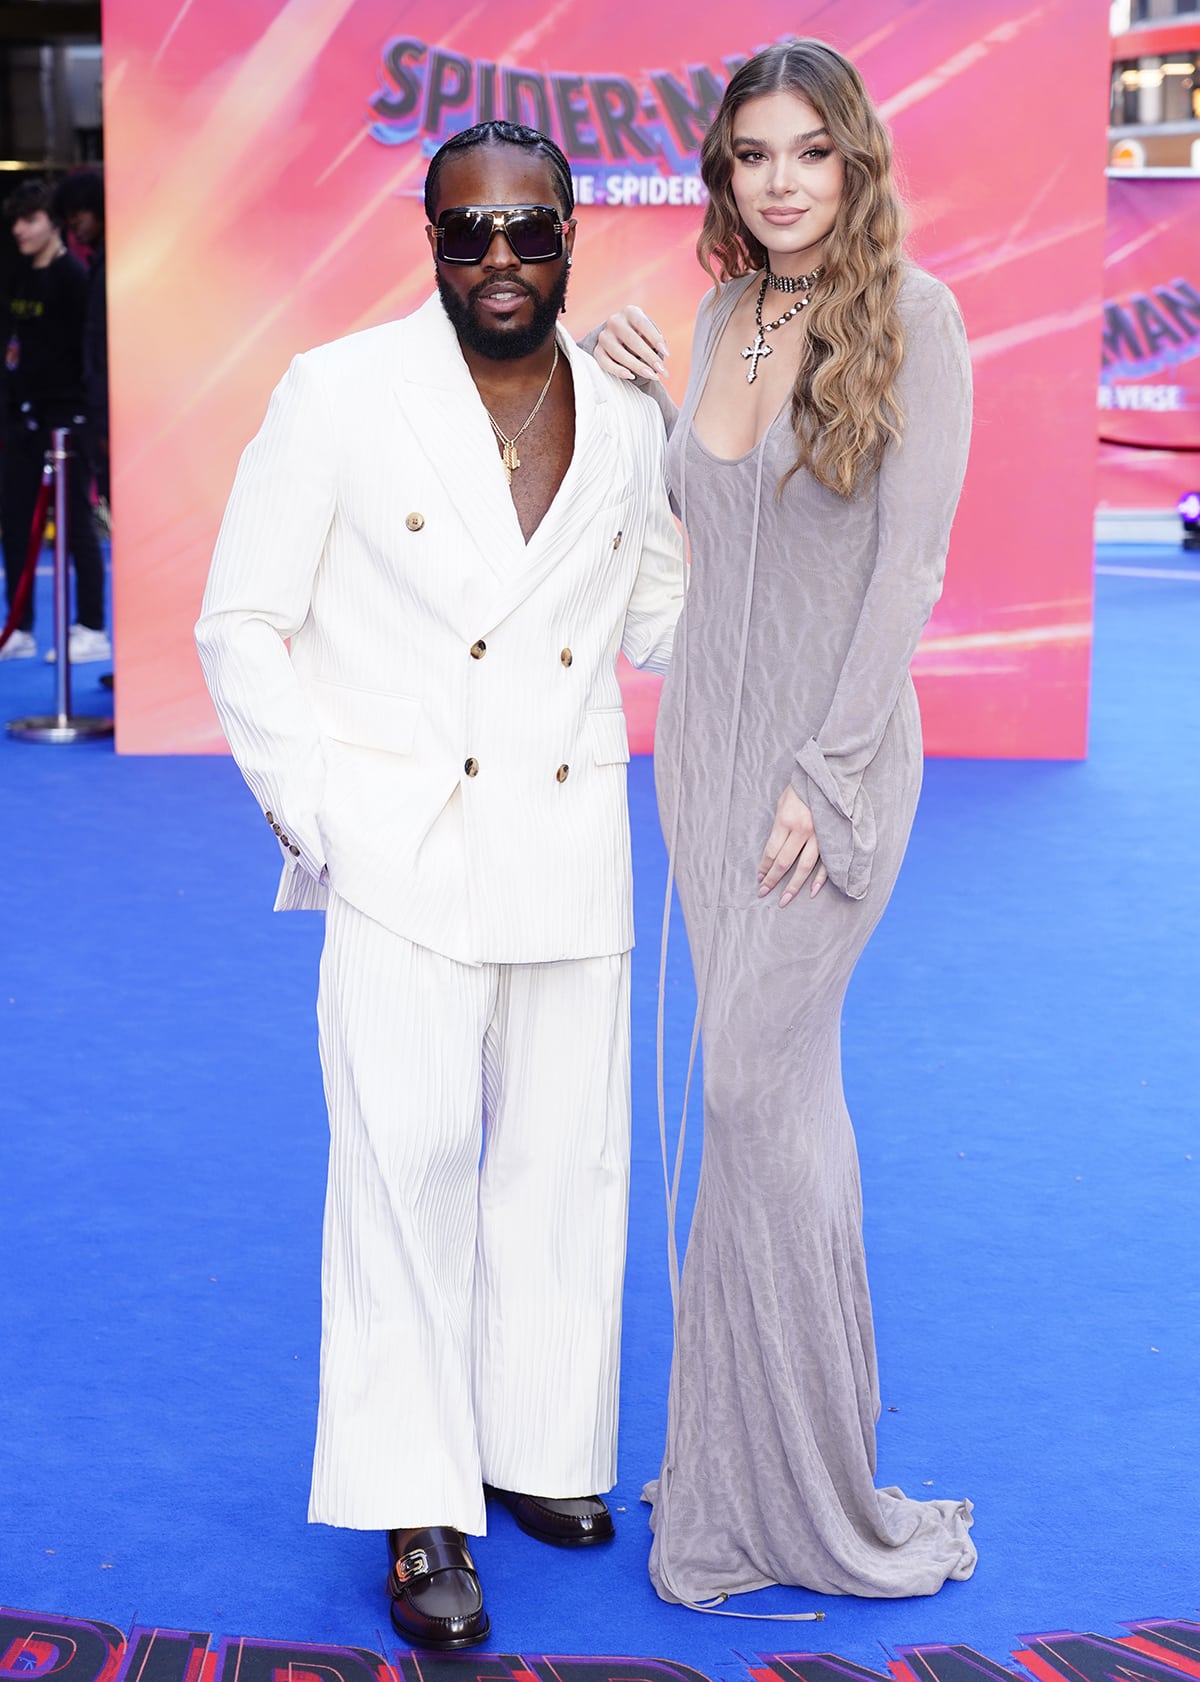 Hailee Steinfeld towers over Shameik Moore, who looks dapper in a white suit, layered gold necklaces, and black sunglasses